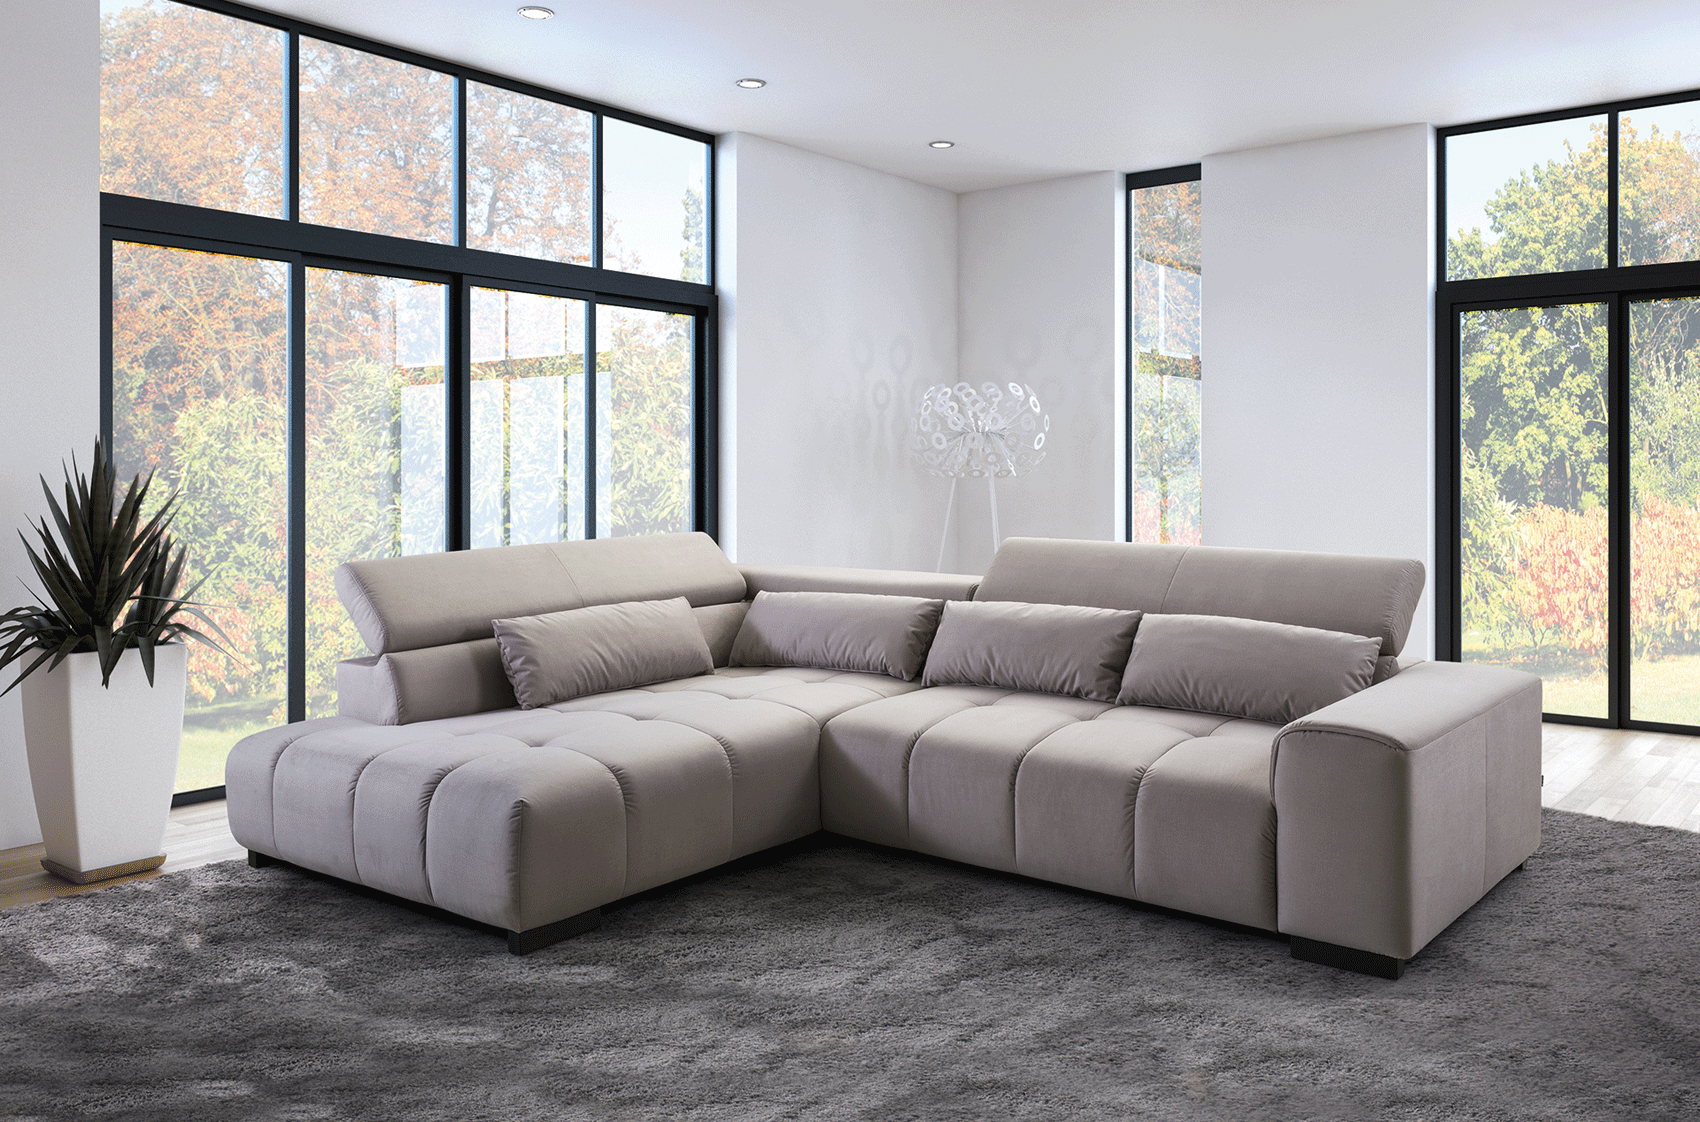 Living Room Furniture Sleepers Sofas Loveseats and Chairs Positano Sectional